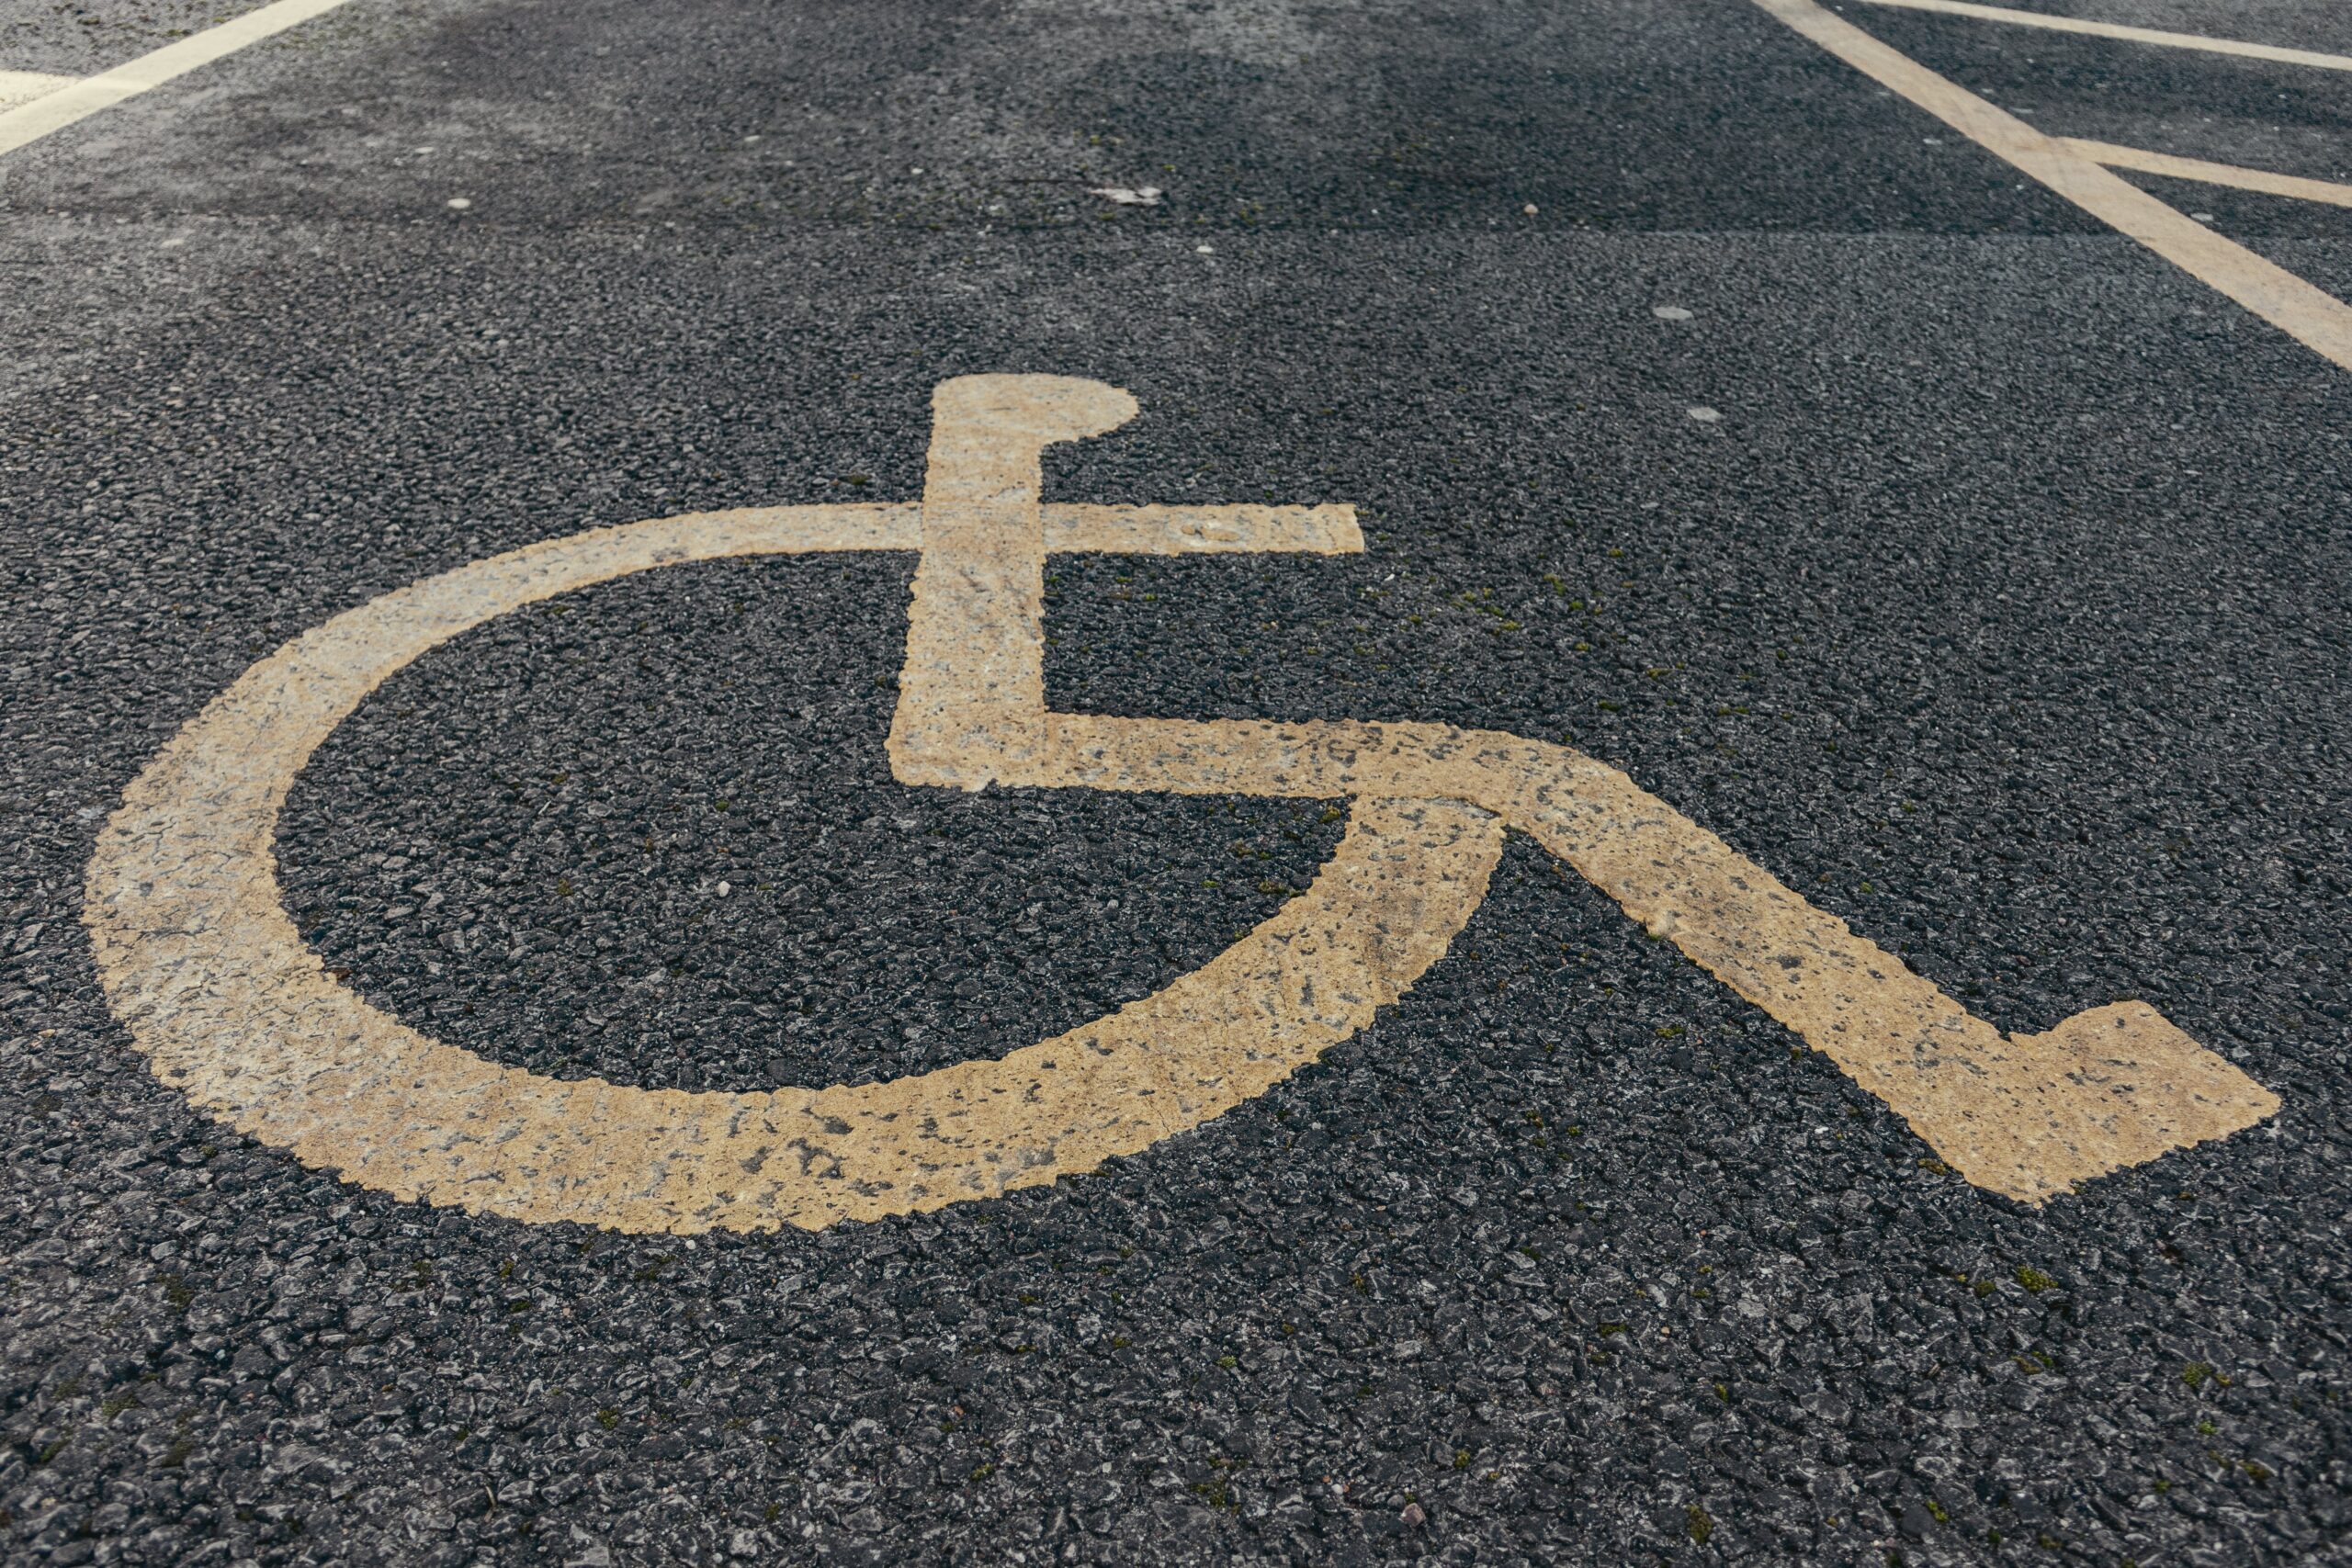 Accessible parking regulations